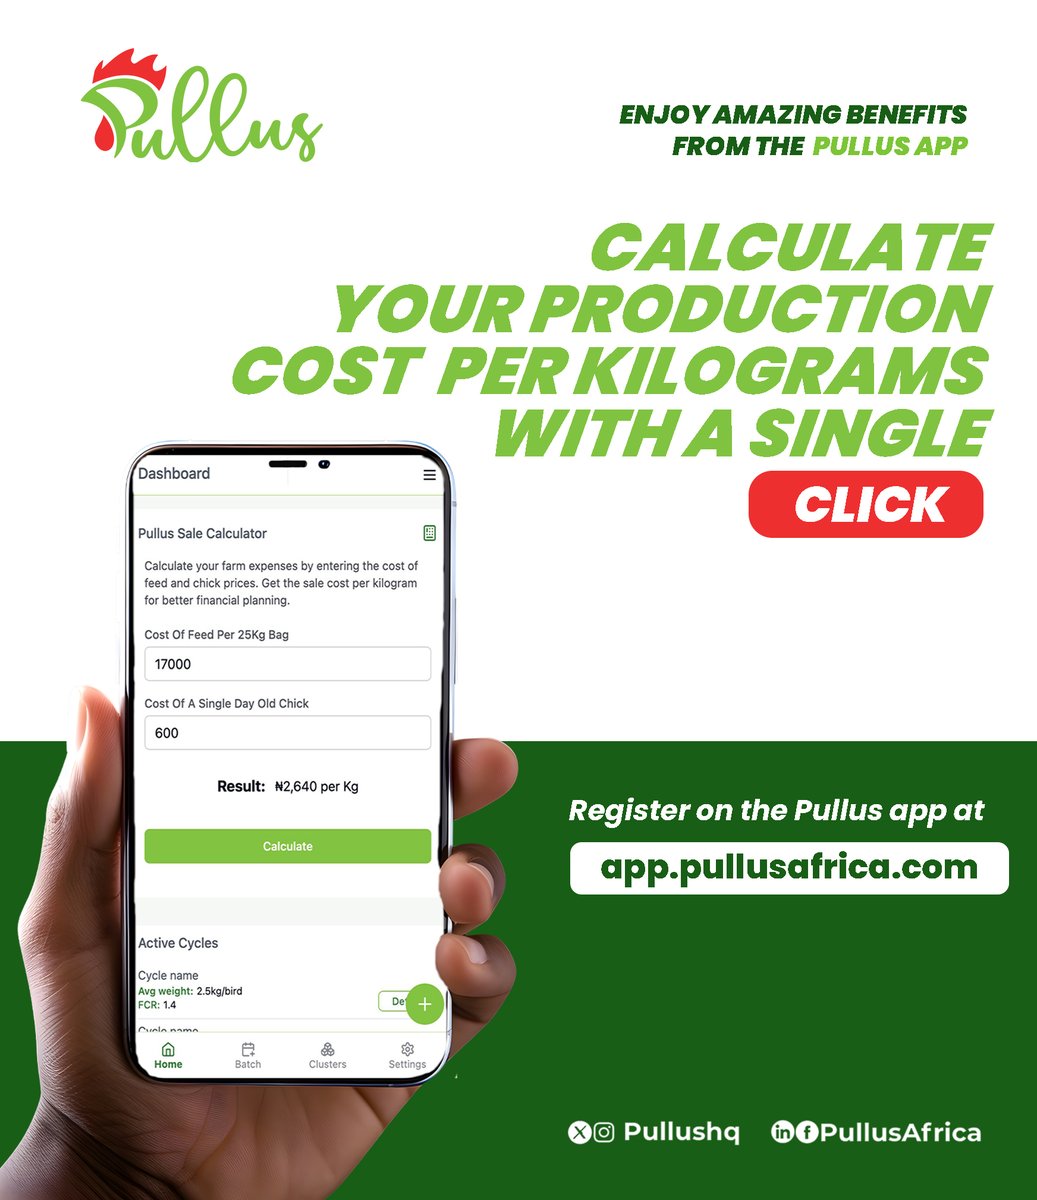 Explore our built-in tool for calculating your farm production cost effortlessly. 
Check out this feature on the Pullus Africa App today -App.pullusafrica.com

#PullusAfrica  #FinancialPlanning #PoultryFarming #SimplifyFarming #ProductionCost #PriceCalculator